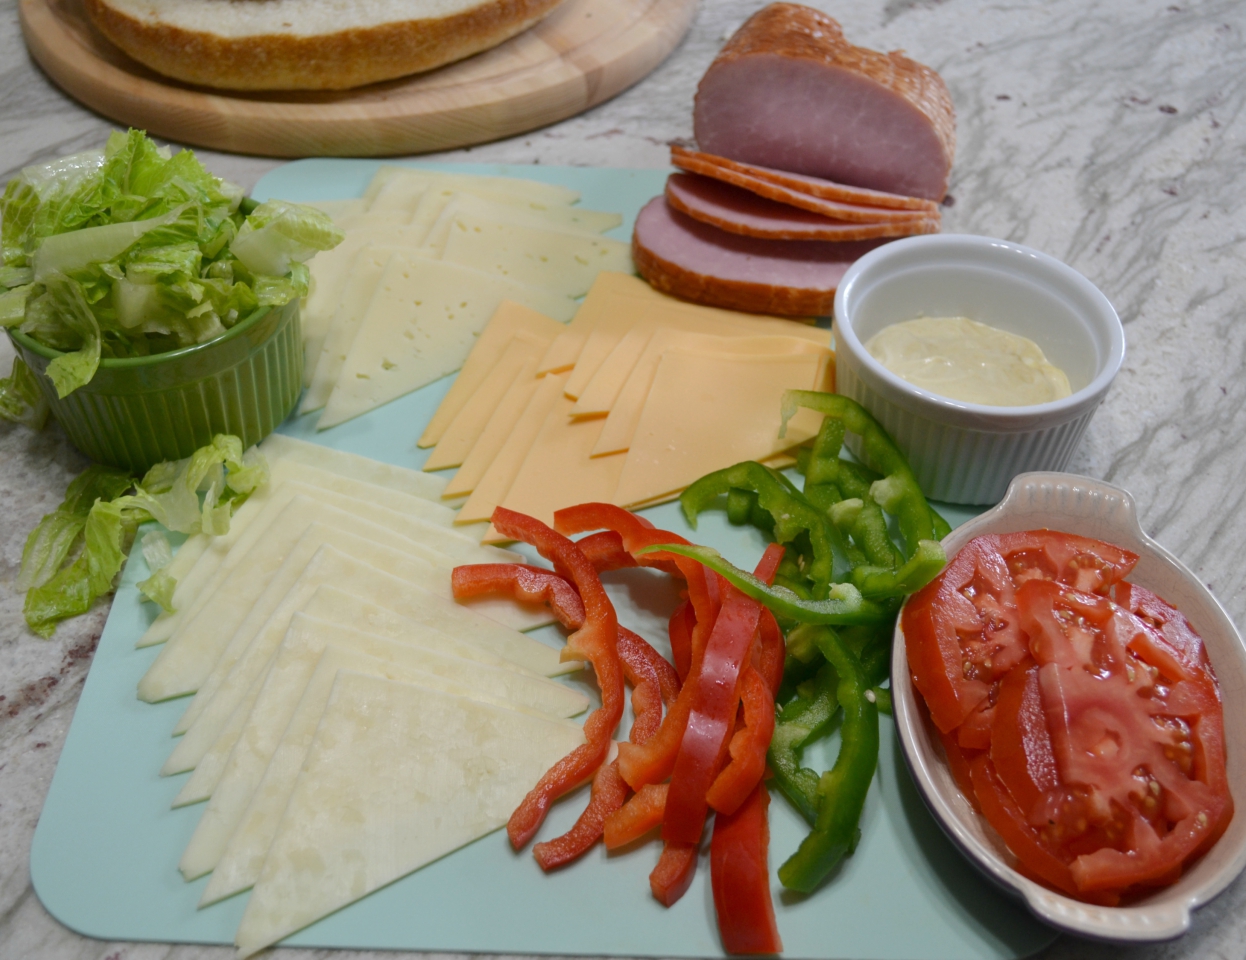 Gourmet Ham and Cheese Party Ring is perfect for any get together. A giant sandwich loaf filled with ham, cheeses, and veggies.